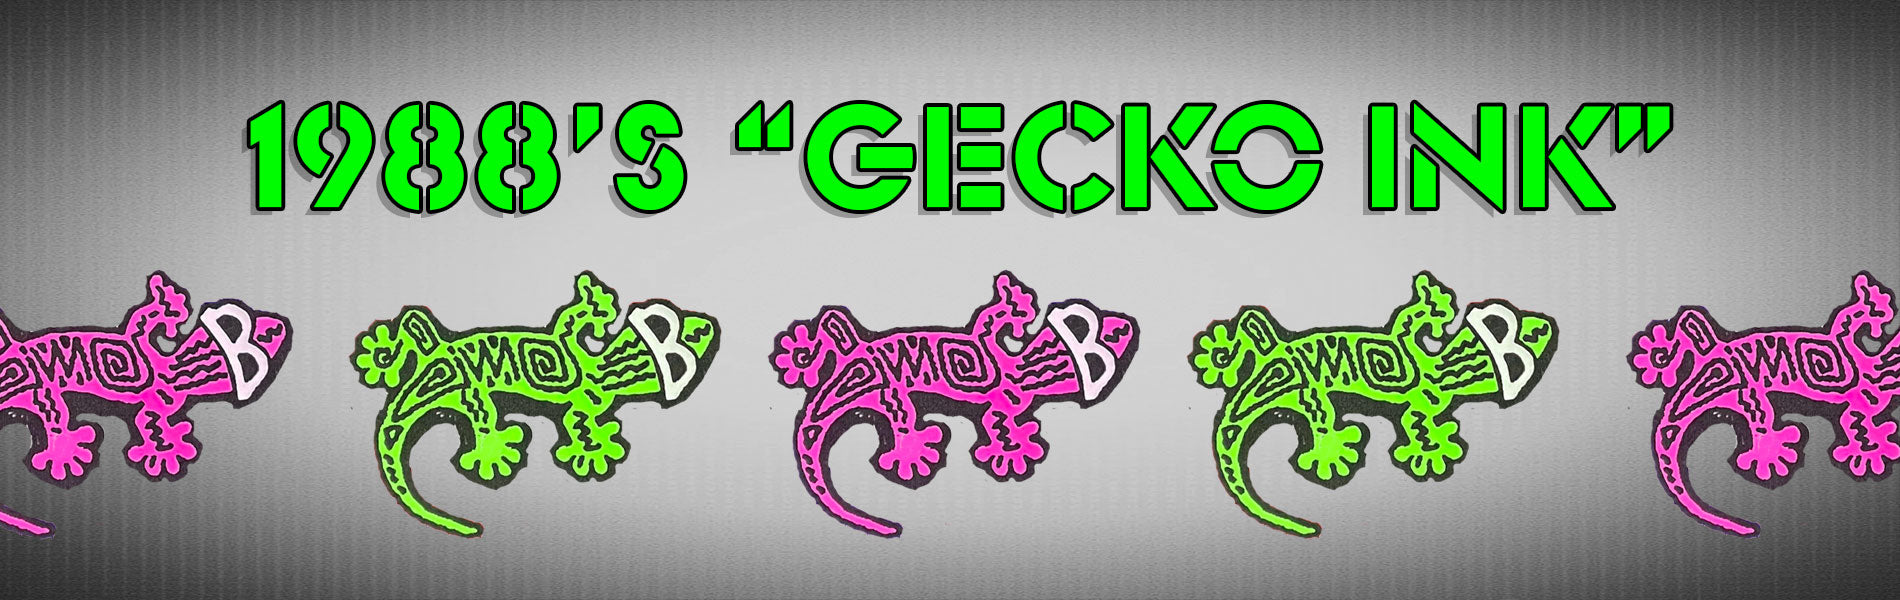 1988 Gecko Ink Collection With Mystery Glow